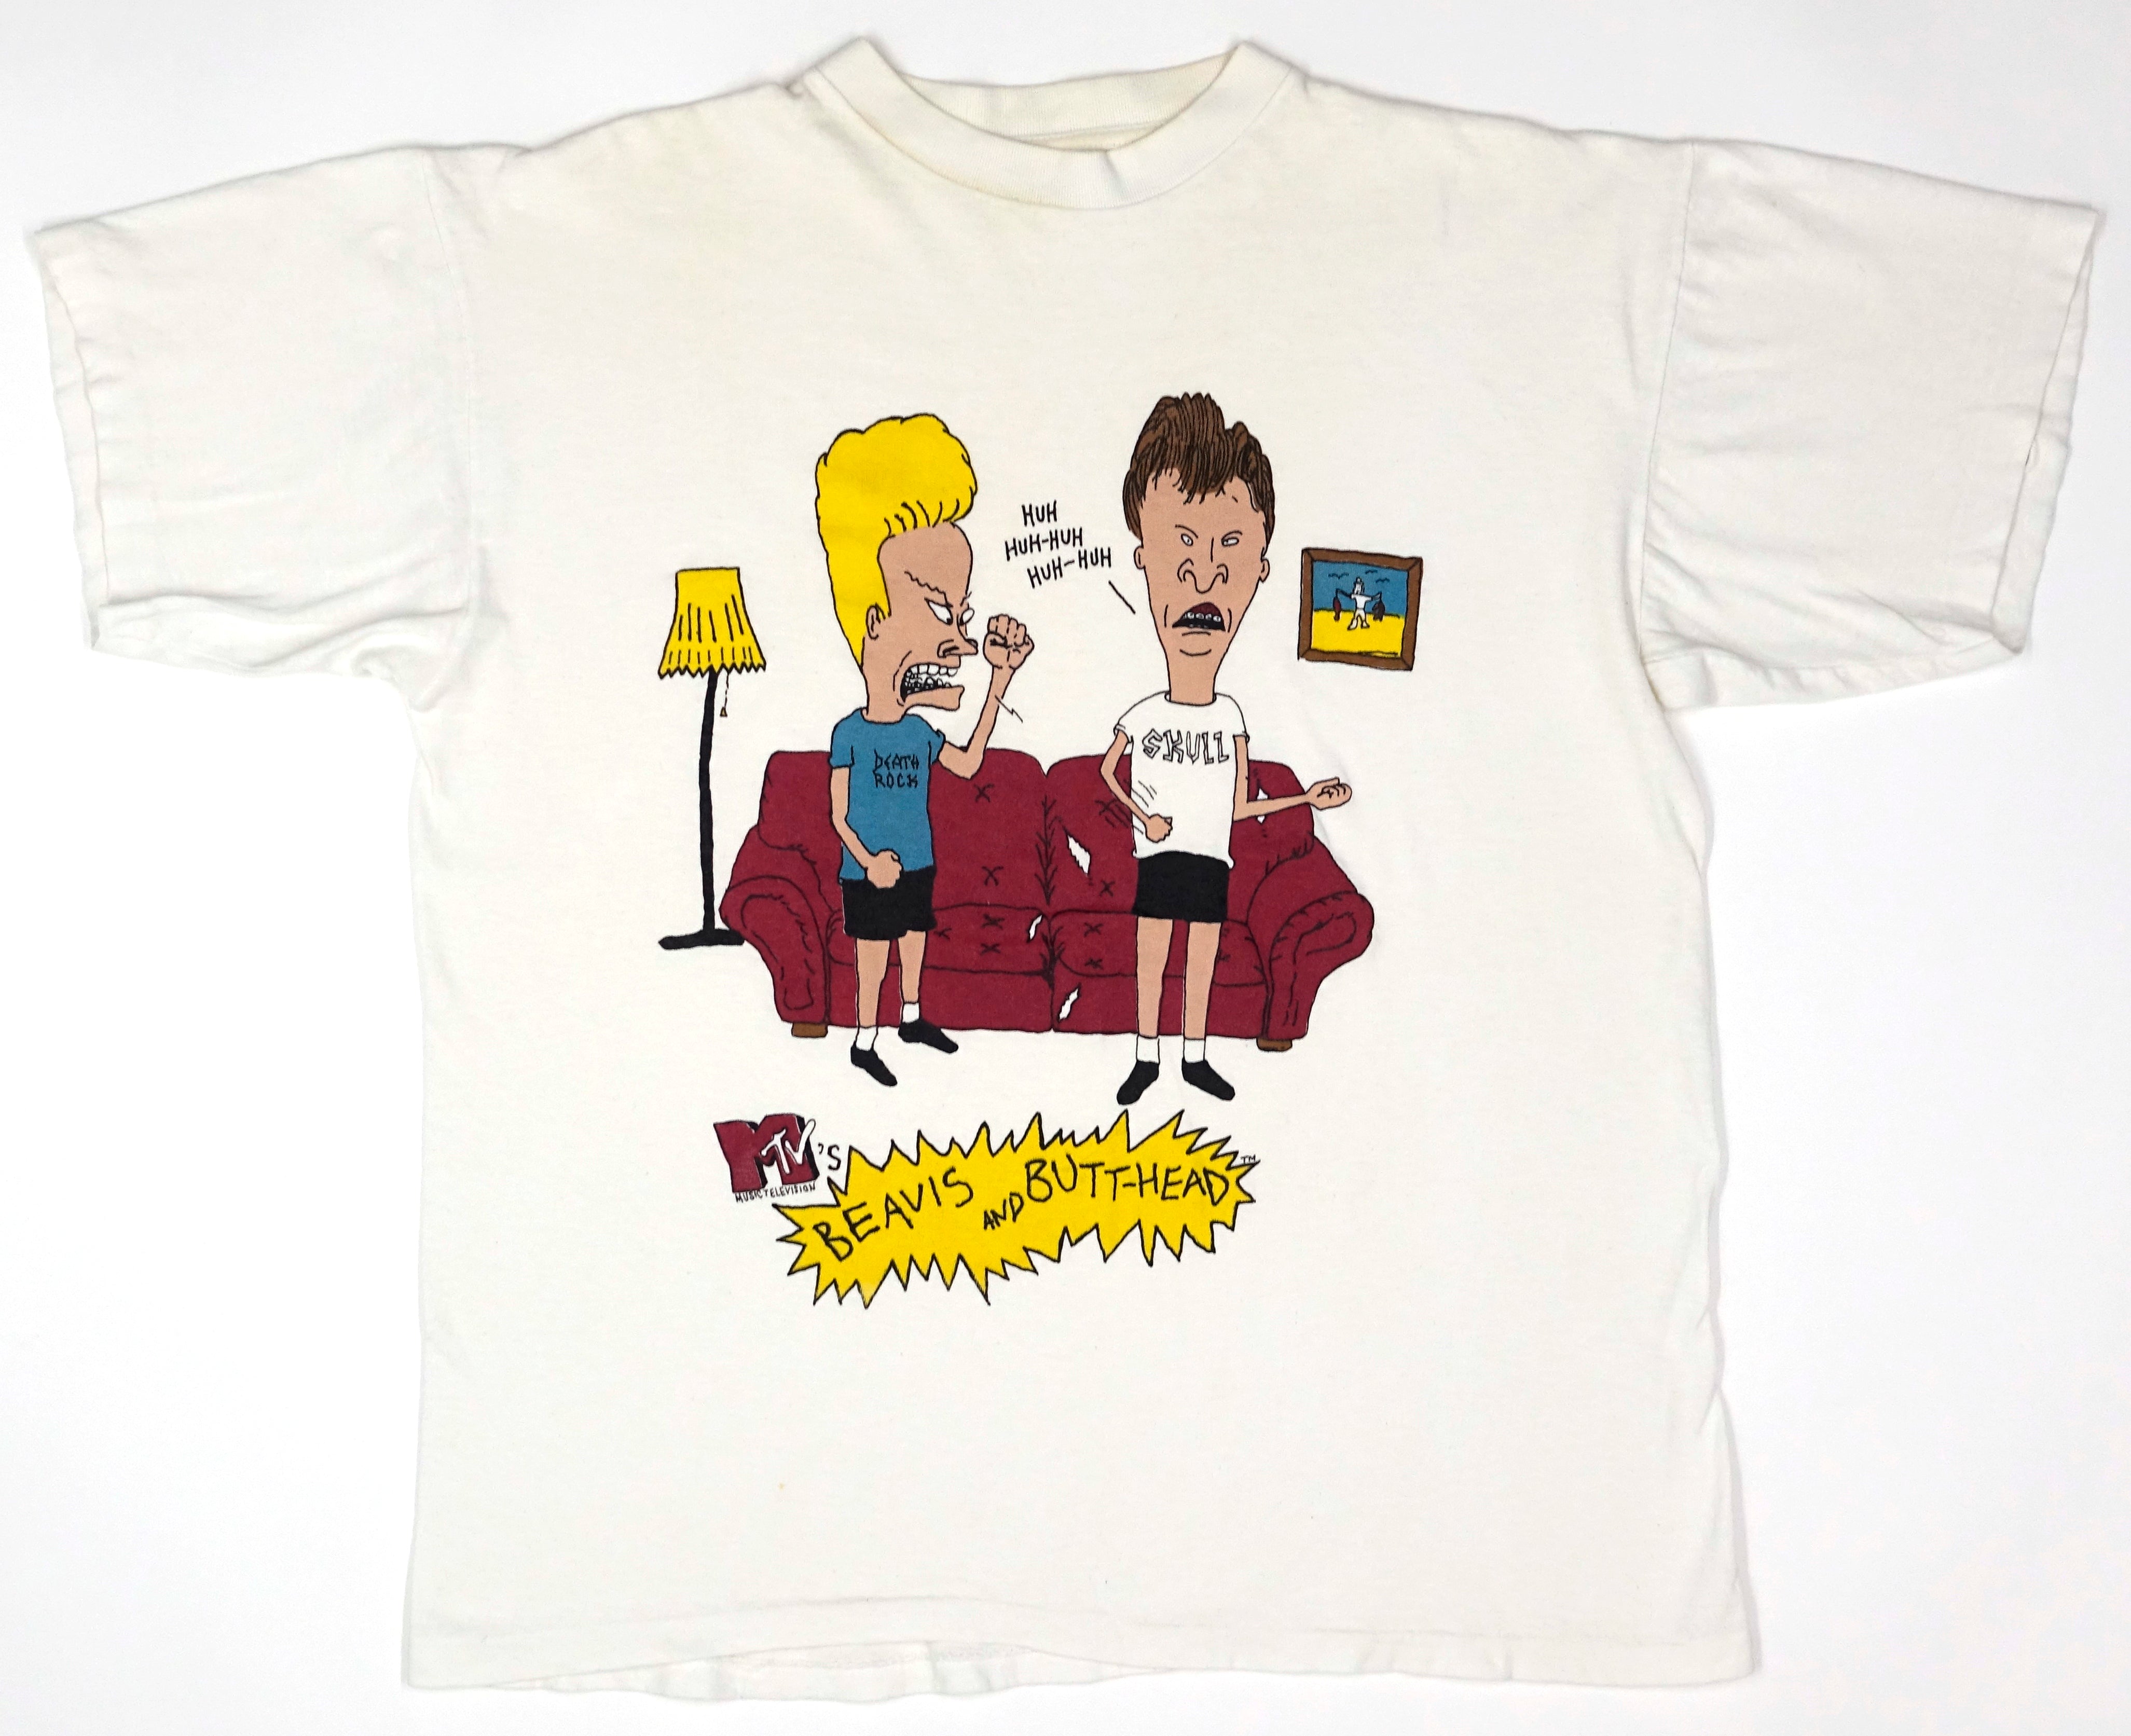 MTV – Beavis And Butthead Show 90s Shirt Size Large